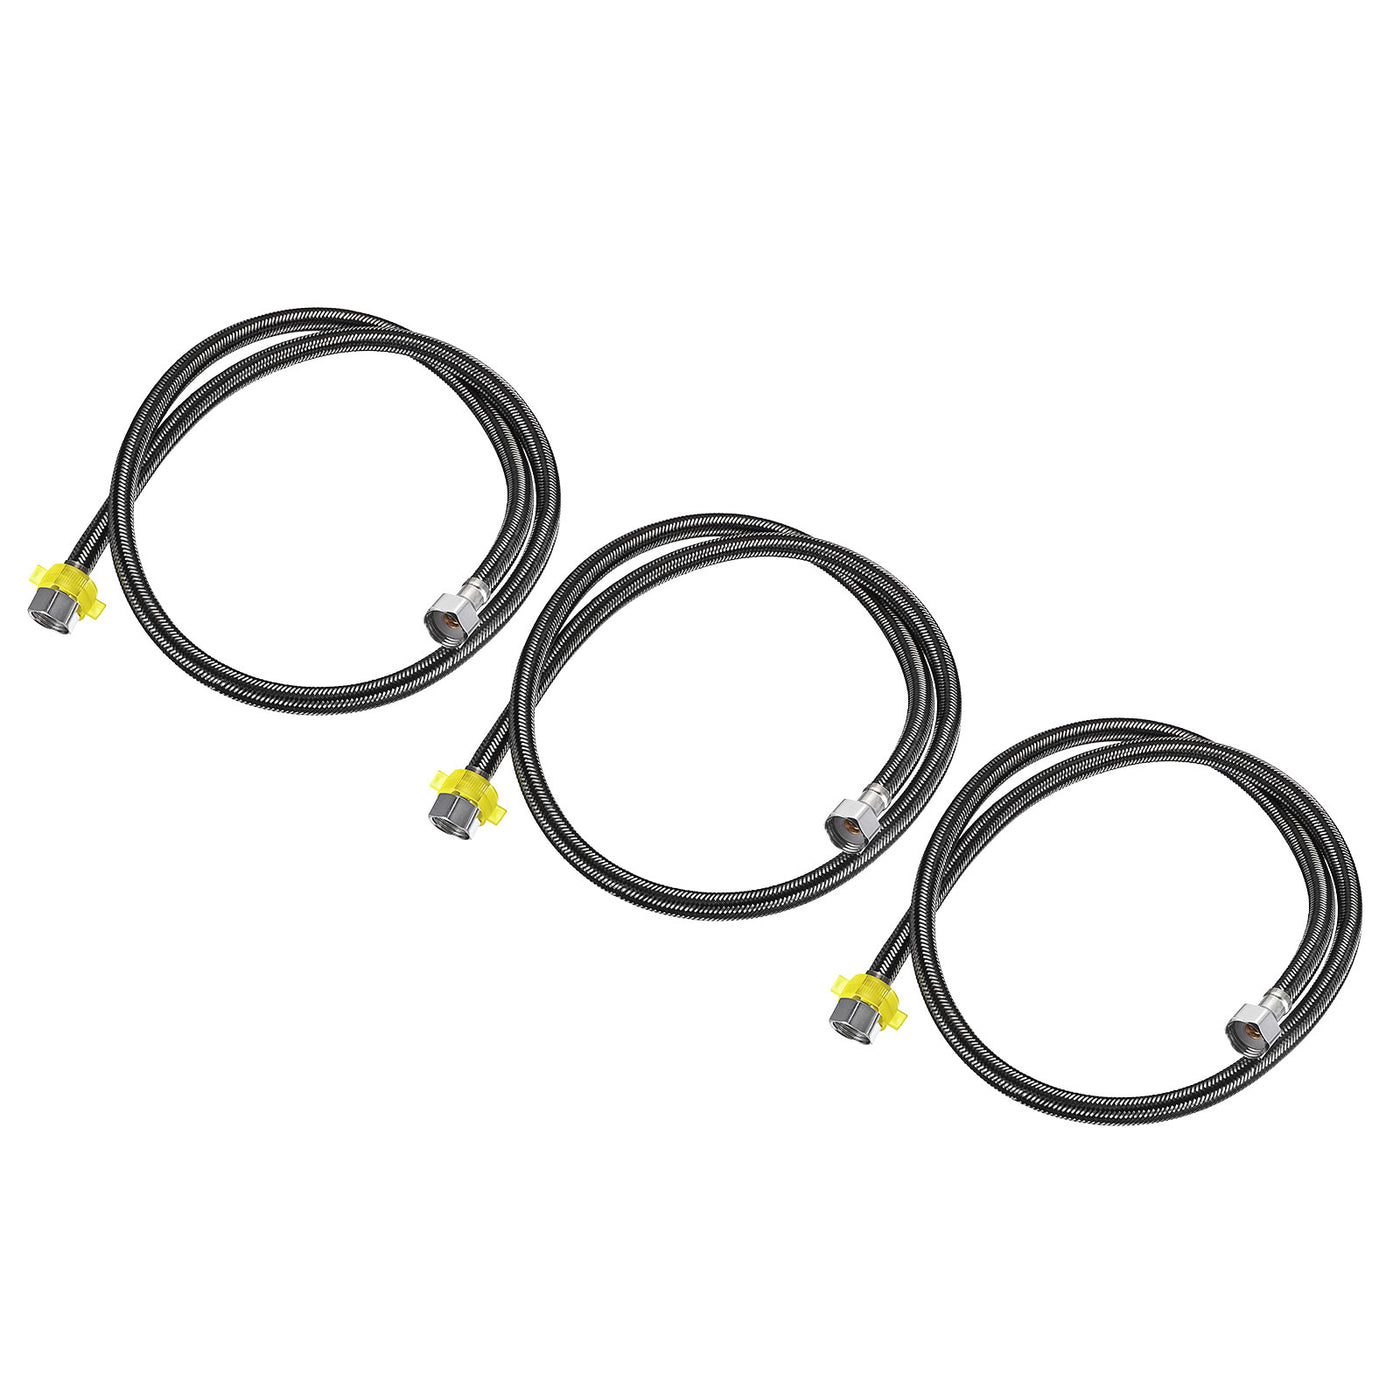 uxcell Uxcell Faucet Supply Line Connector, 3pcs G1/2 Female x G1/2 Female 47" Hose, Black